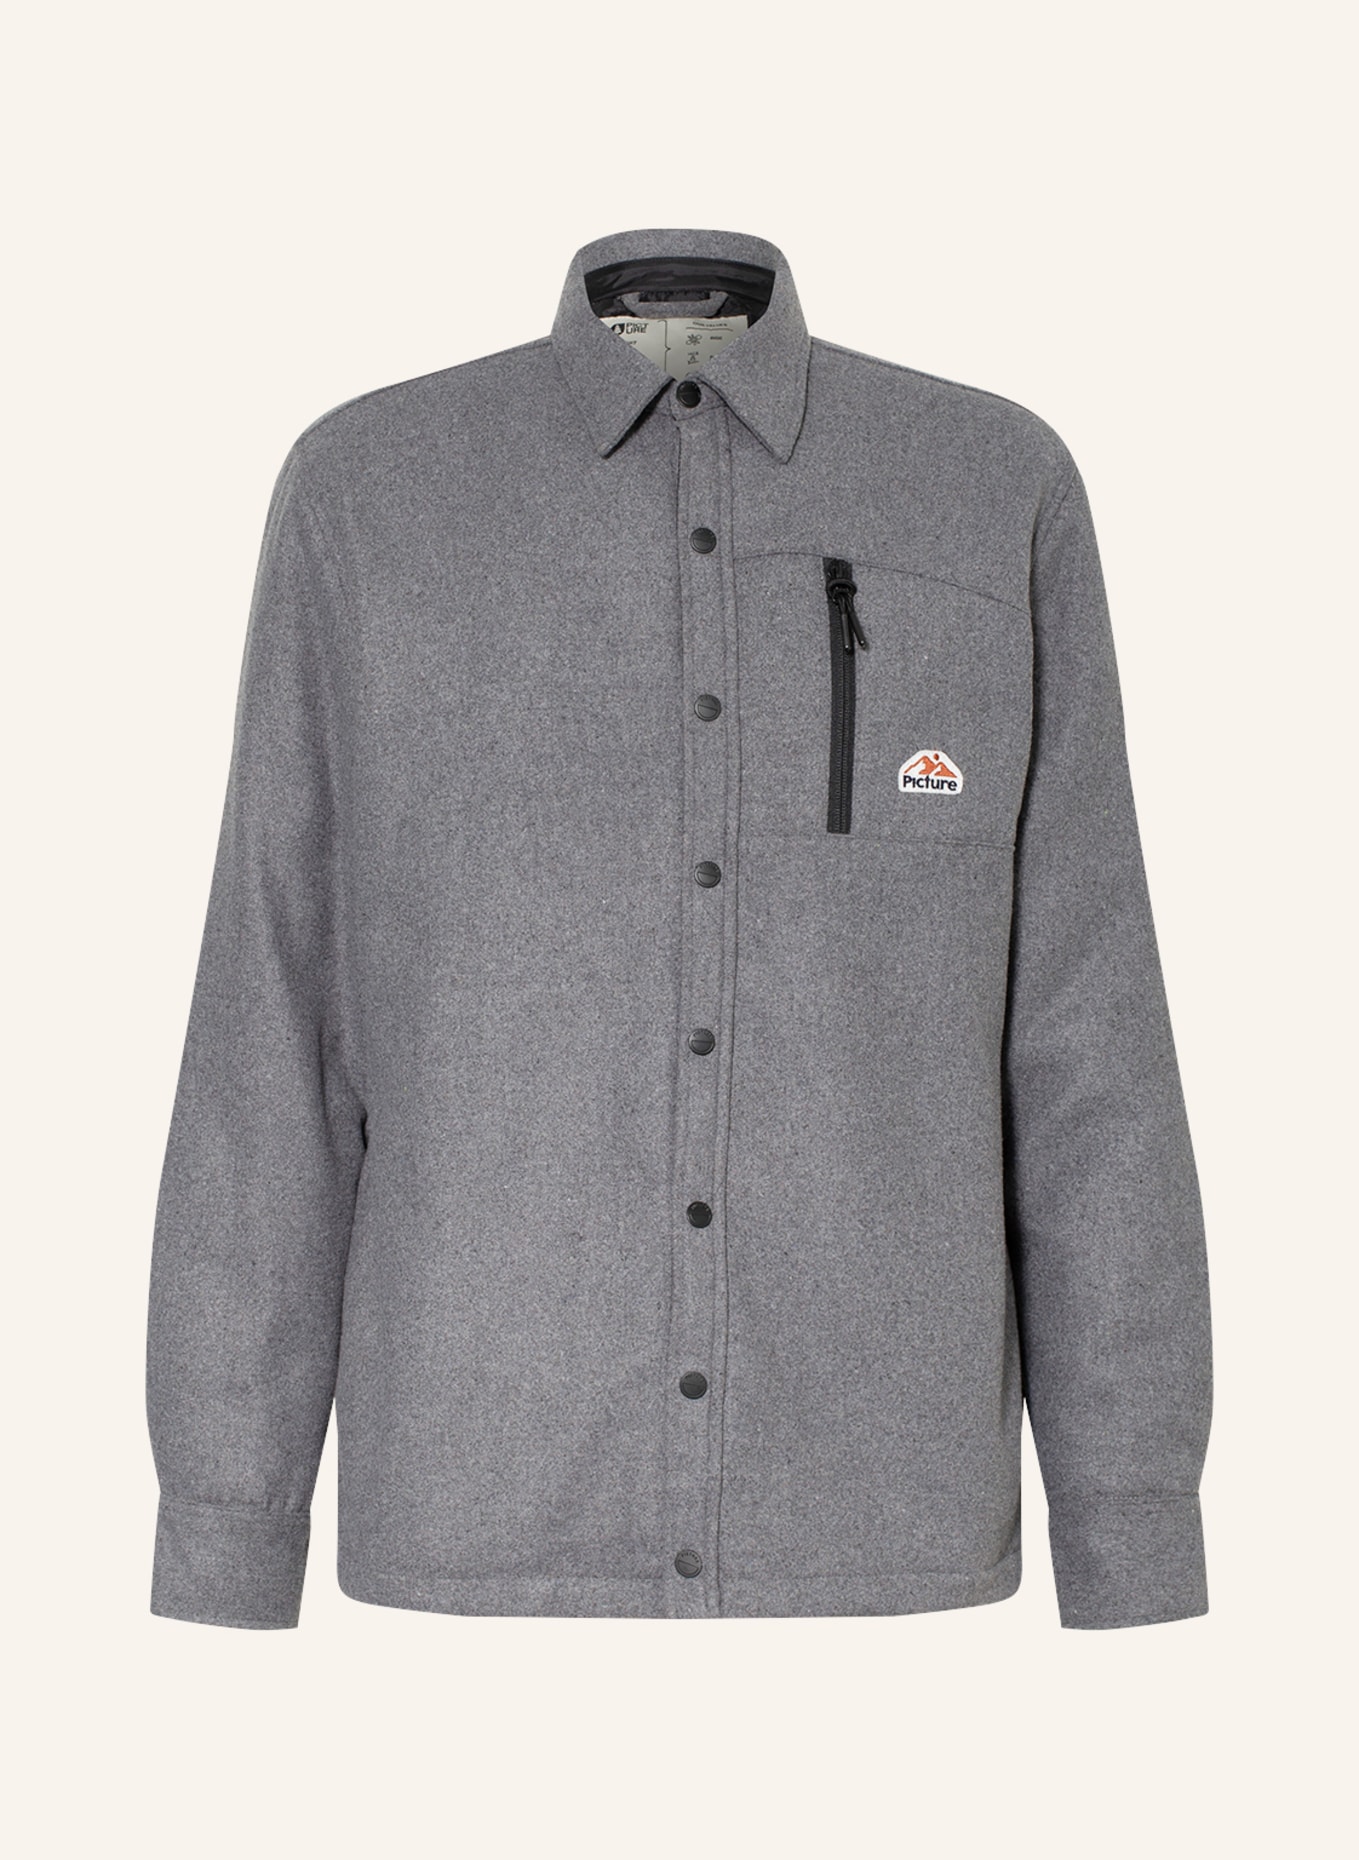 PICTURE Overshirt COLTONE, Color: GRAY (Image 1)